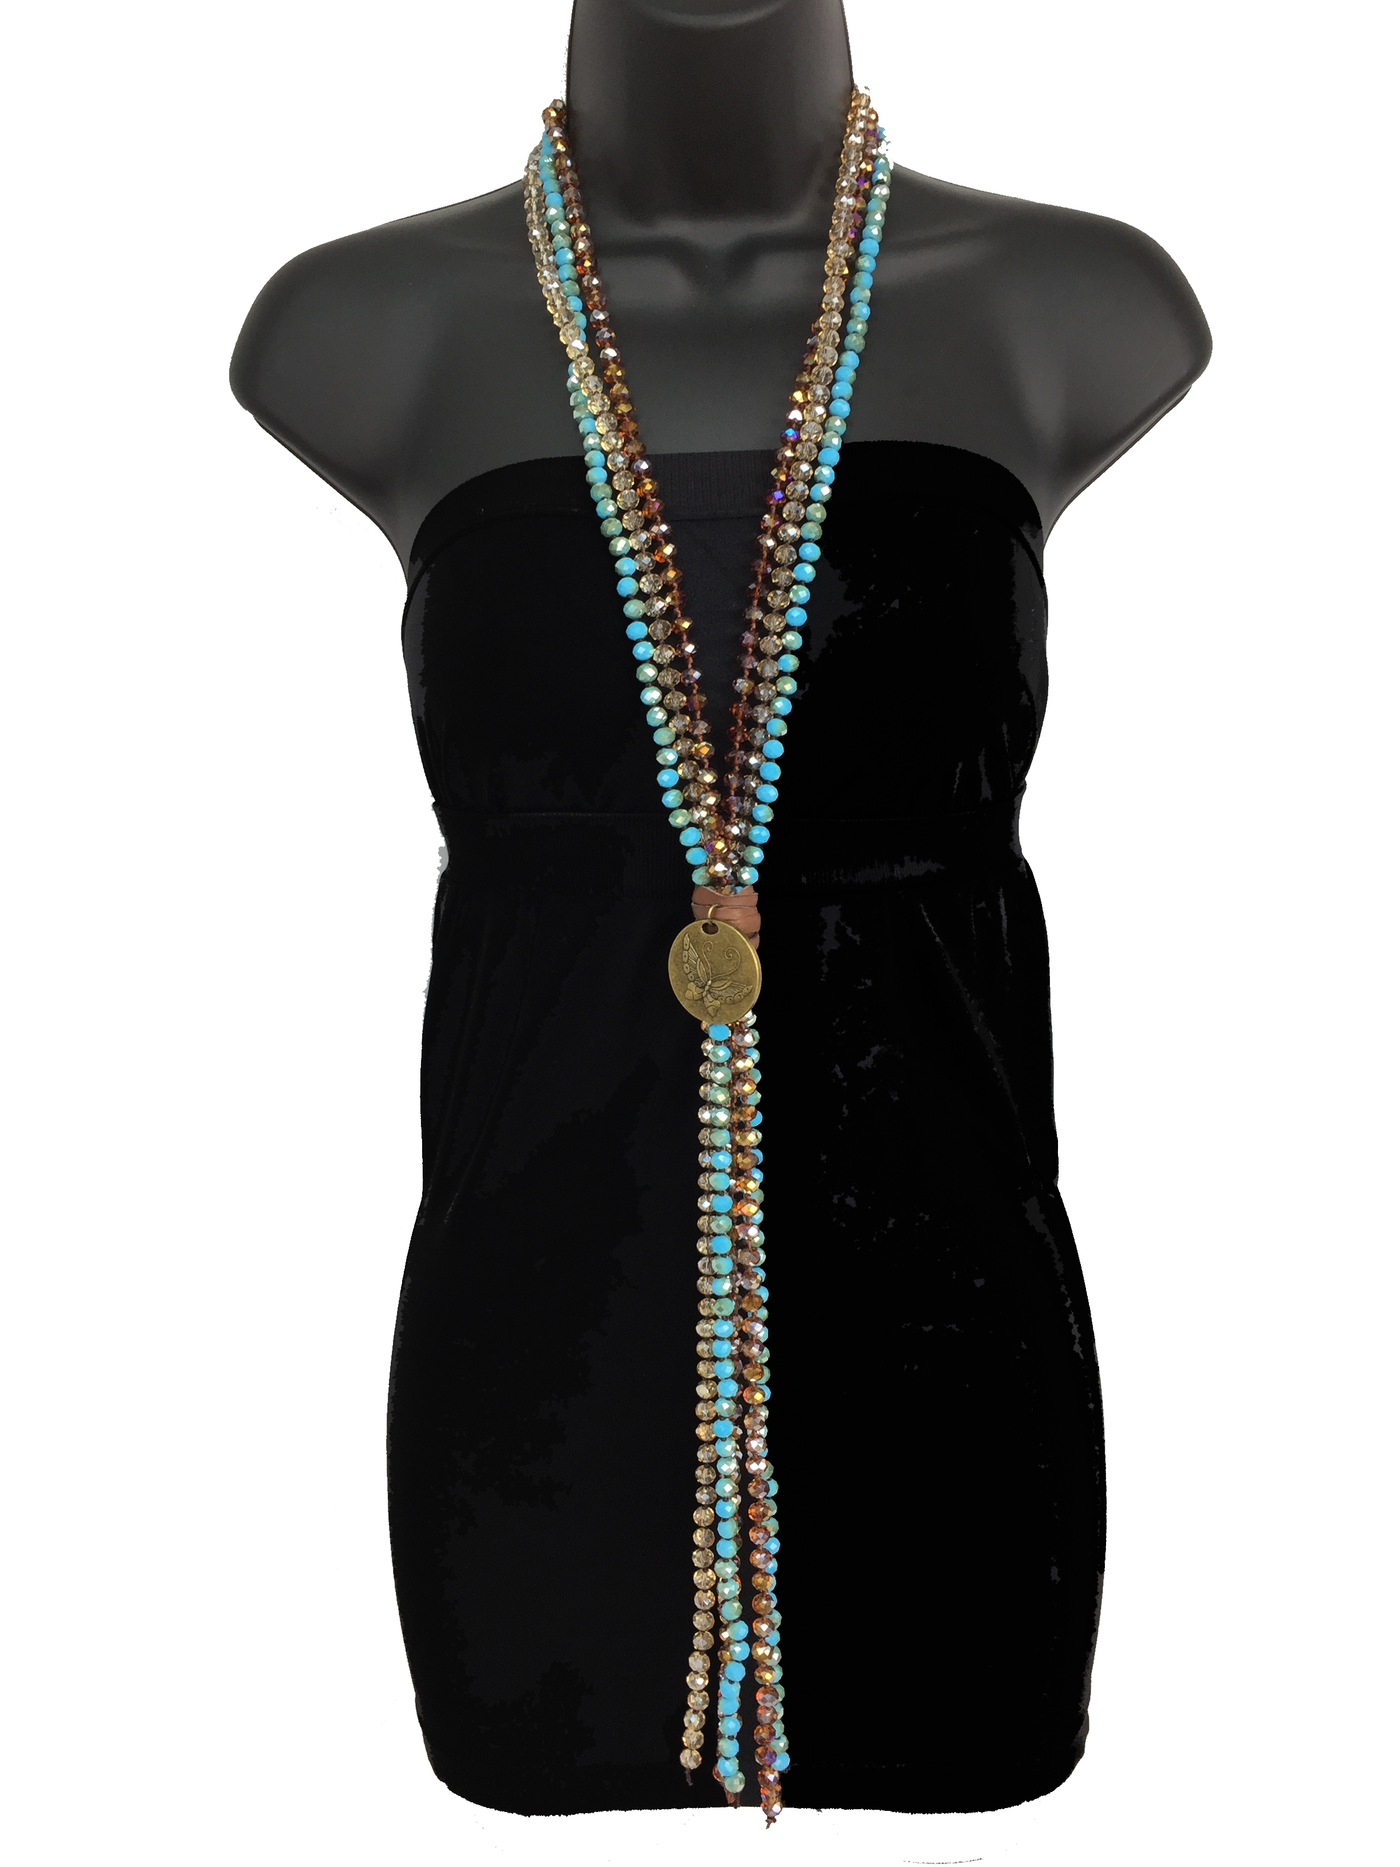 Brand: Carol Su - Fabulous Beaded Long Statement Necklace -  Beaded, BoHo, Featured, Jewelry, Made in America, made in usa, Made Local, Natural Stone, Necklace, Pendant, Spring, Summer, Turquoise, Women - Classy Cozy Cool Boutique